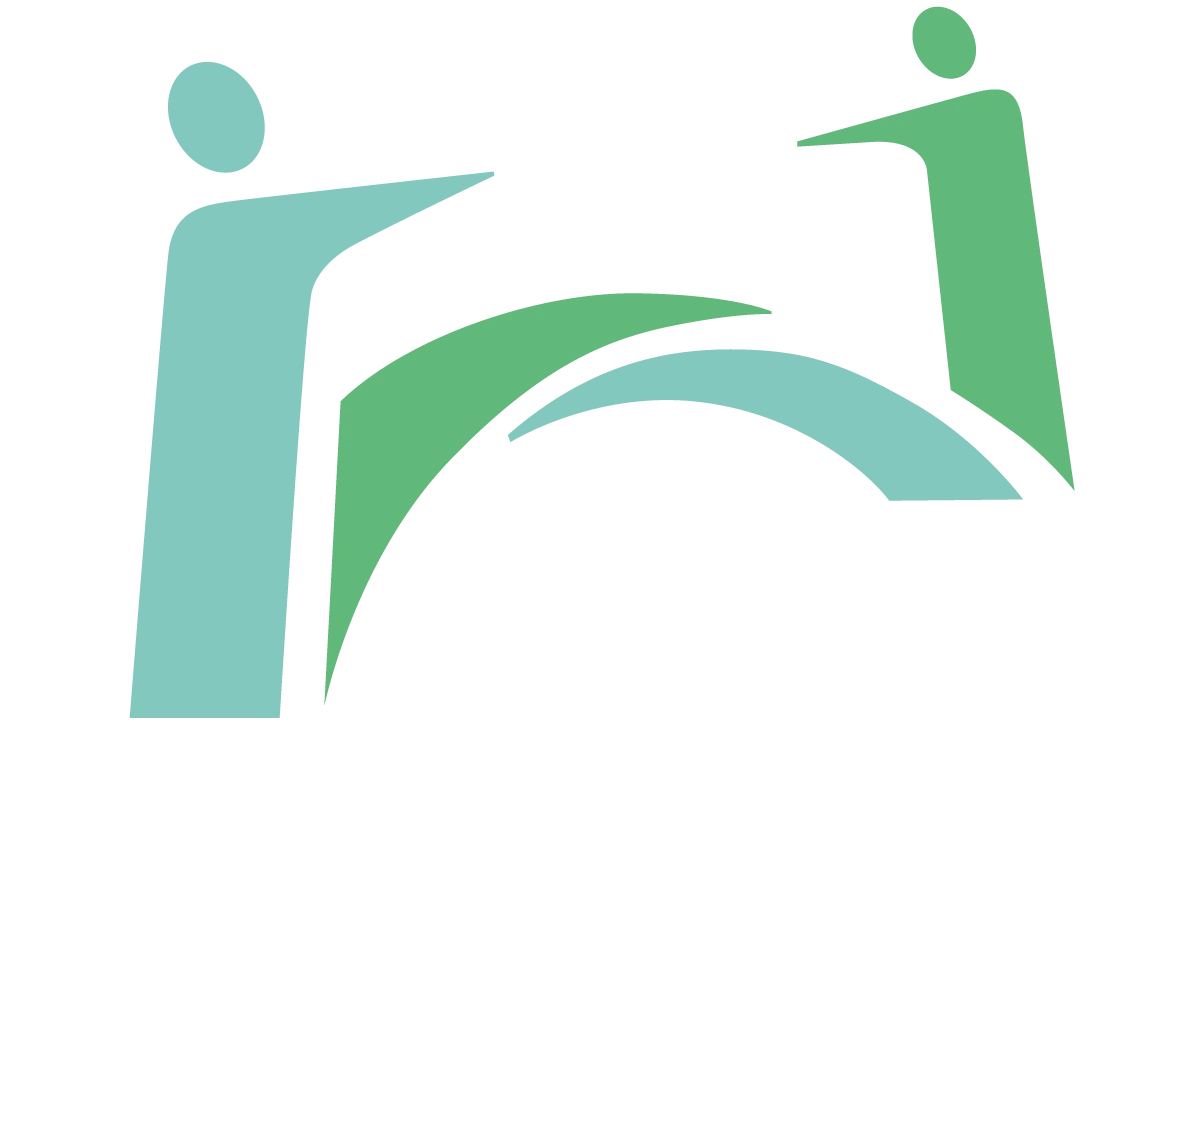 Sound Choice Business Support